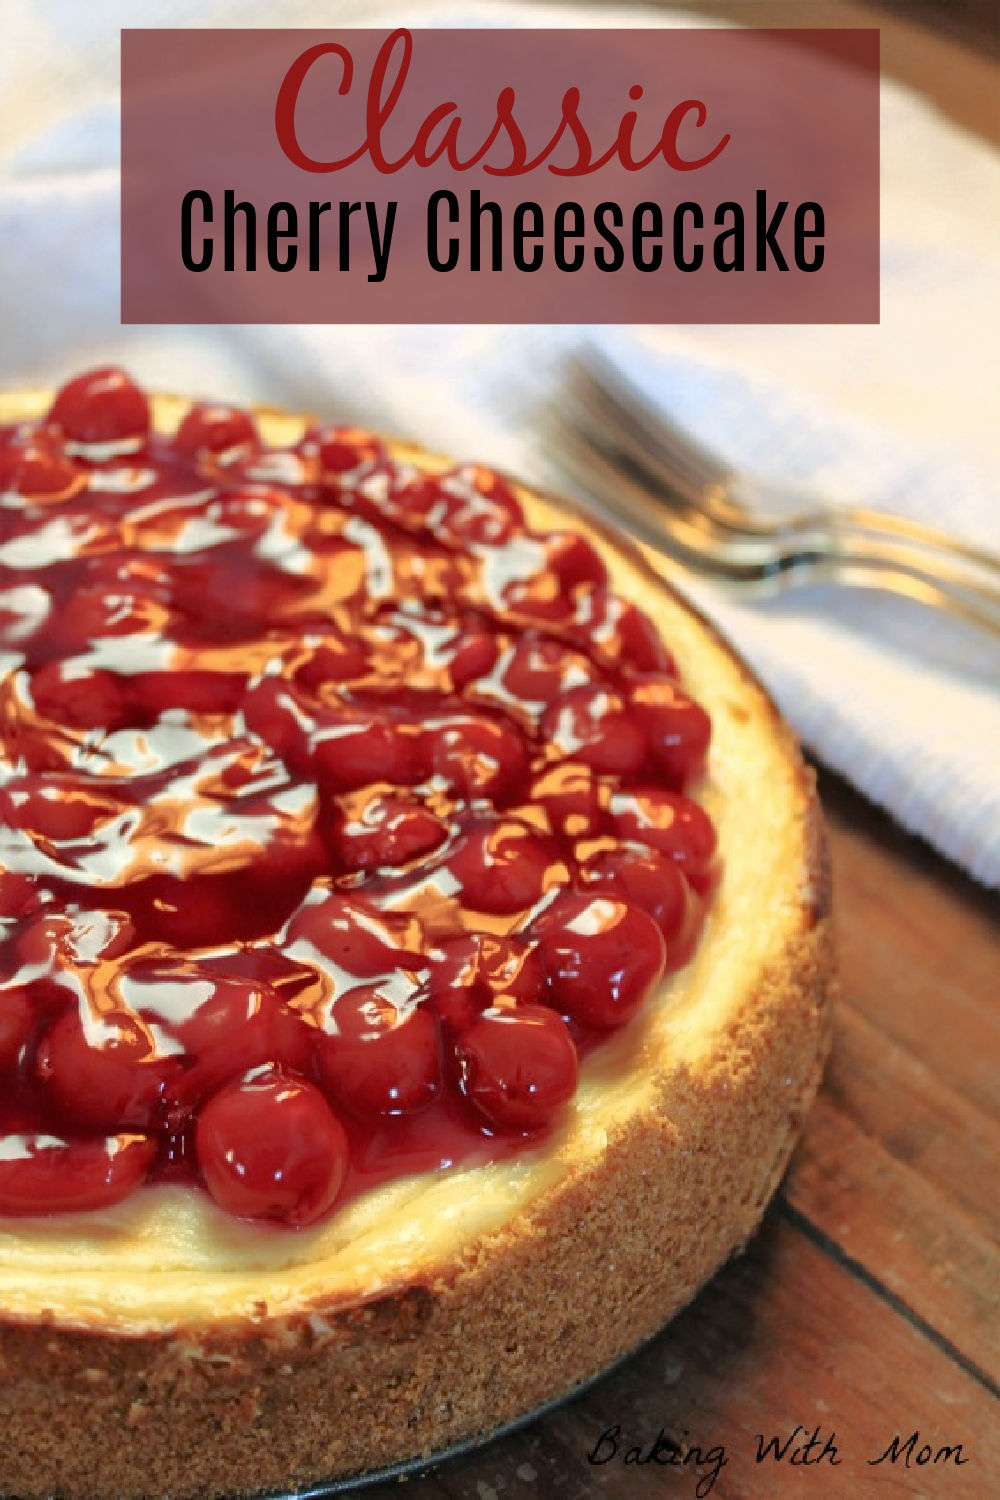 A baked cherry cheesecake